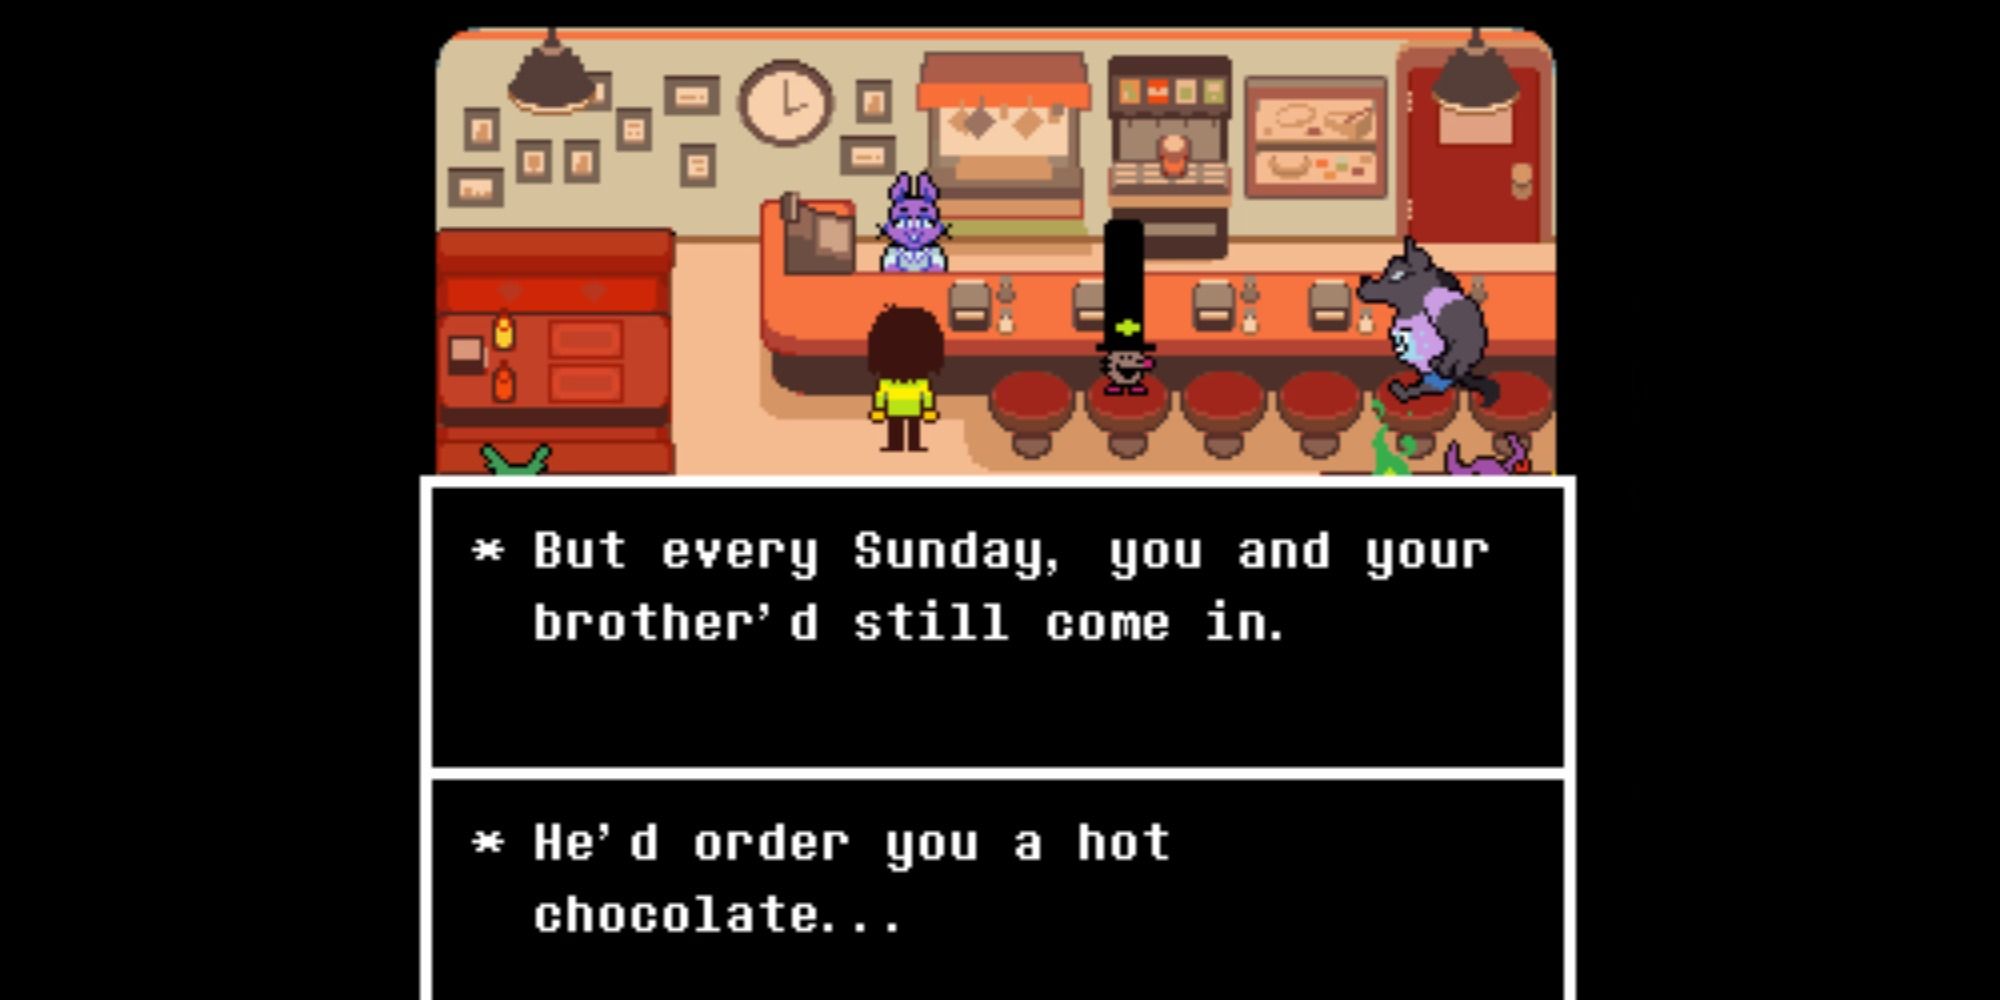 The cashier comments on Kris and Asriel's hot cocoa orders in QC Diner